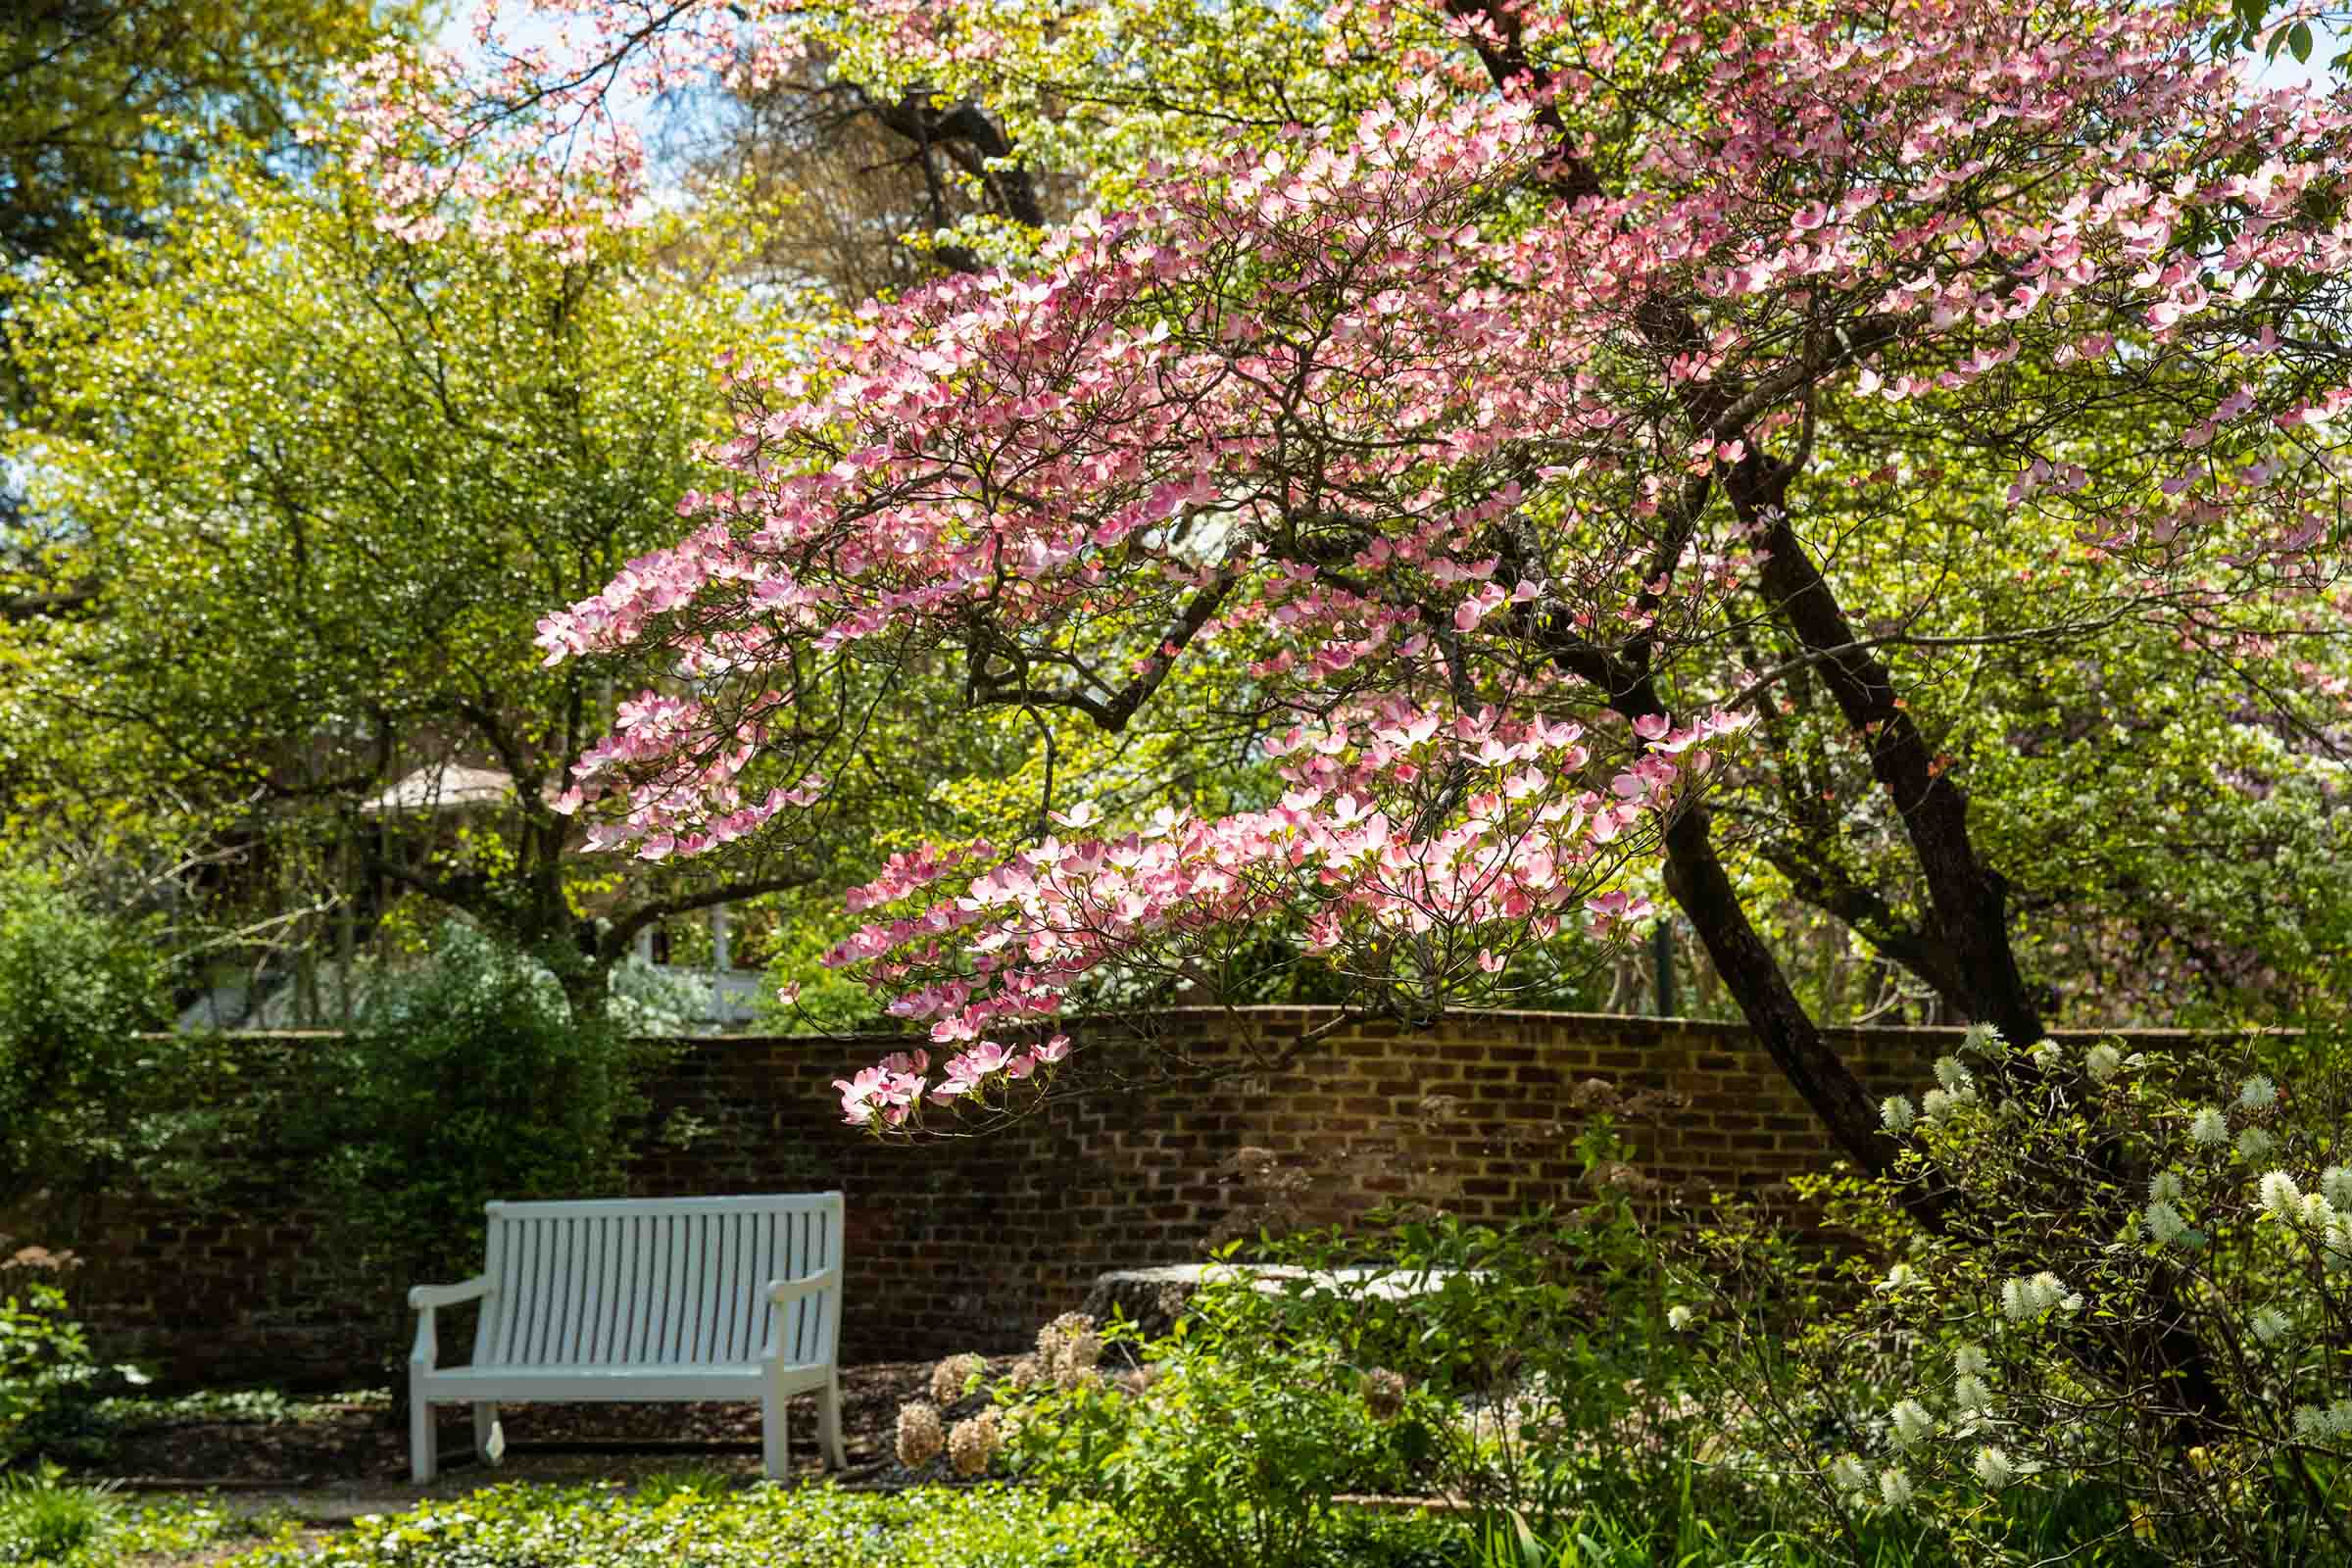 Tree with pink blooms standing over a white bench